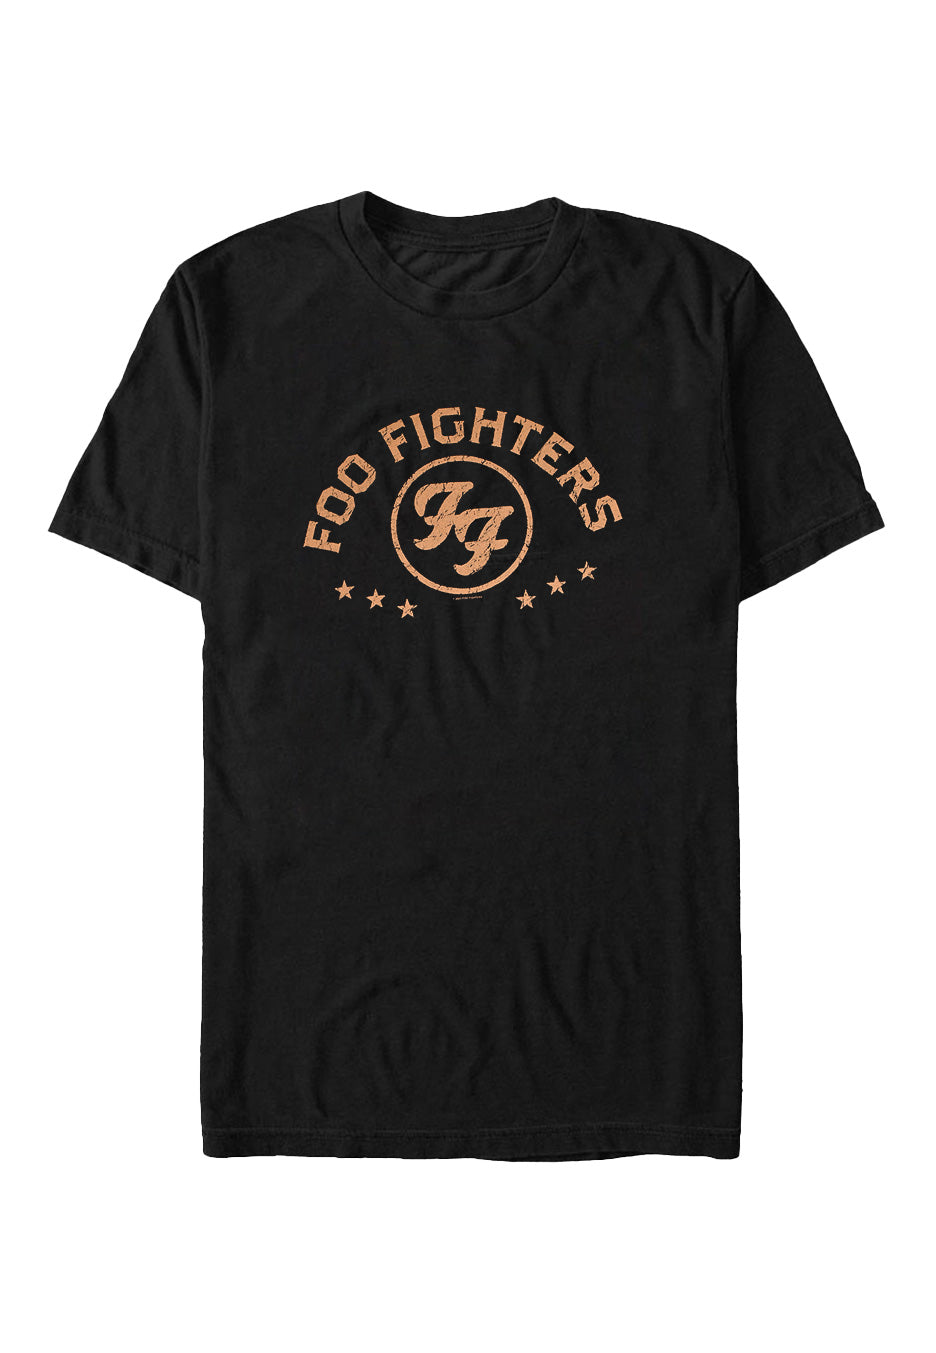 Foo Fighters - Arched Stars - T-Shirt